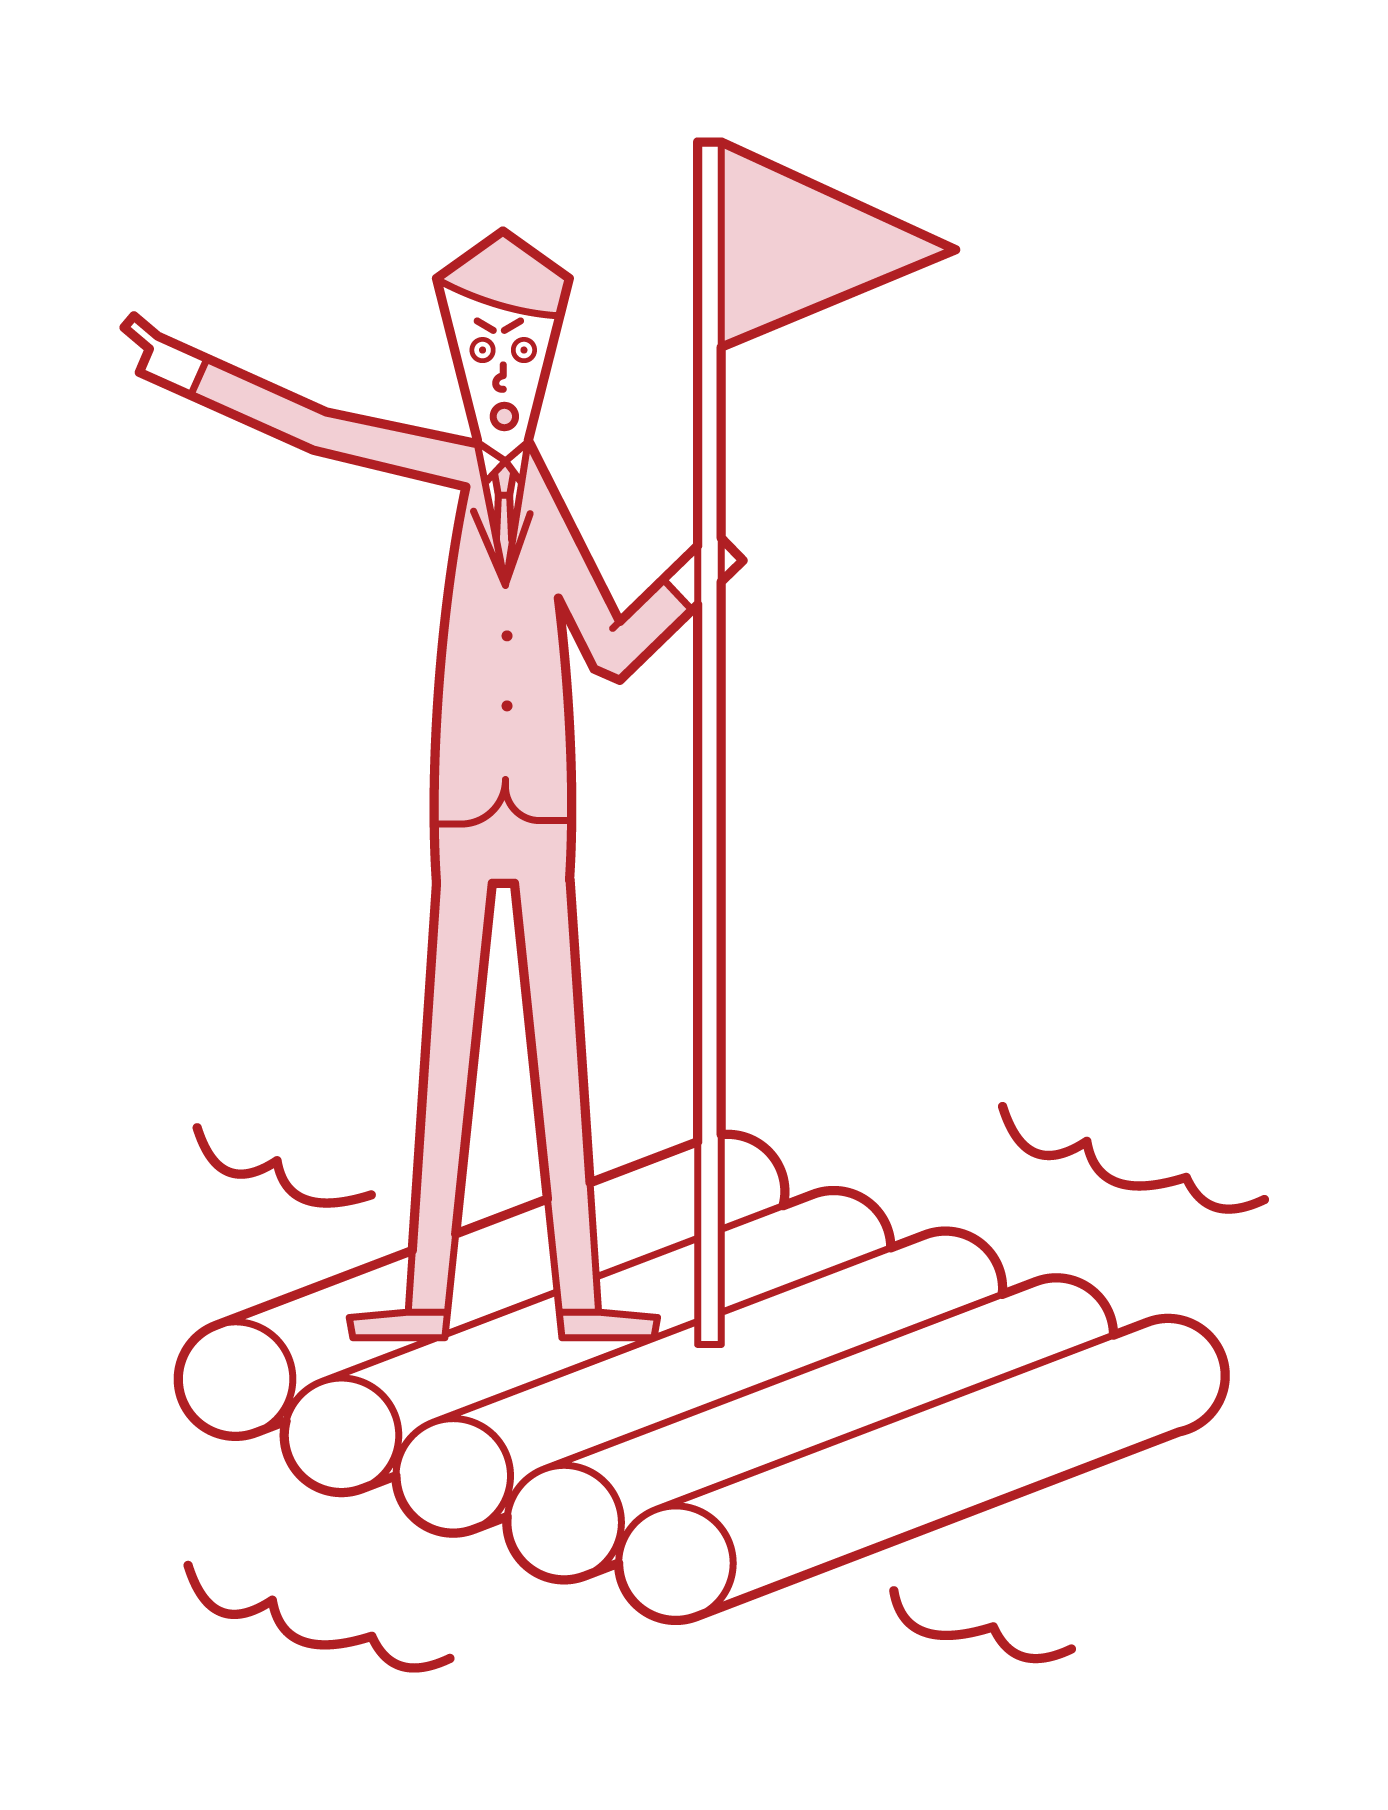 Illustration of a man (male) who rides a raft and aims for his destination